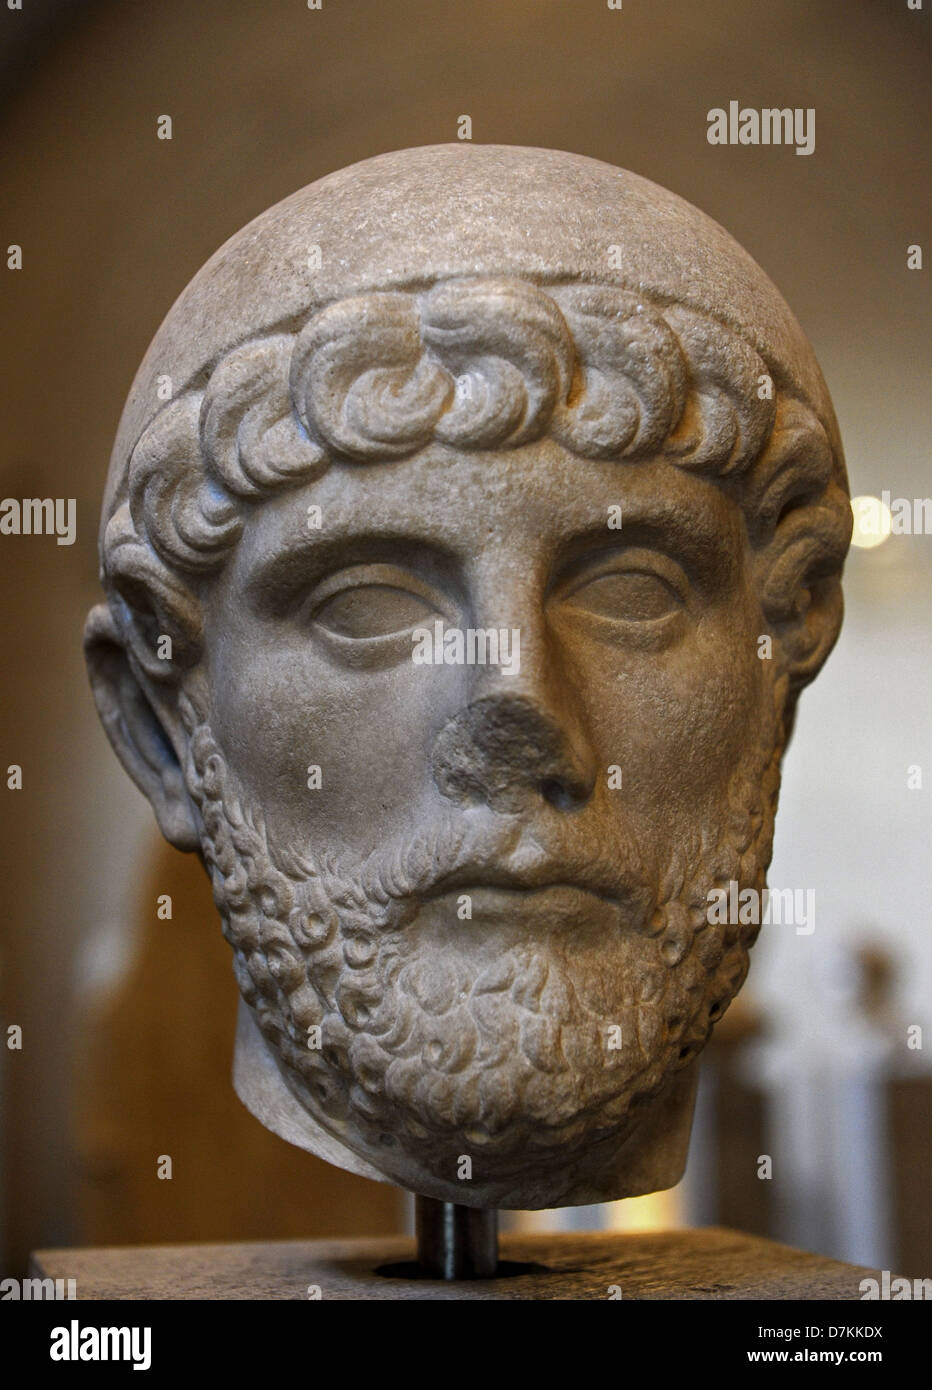 Roman art. Imperial era. Head of a man with a Priest's cap. About 120 AD. Stock Photo